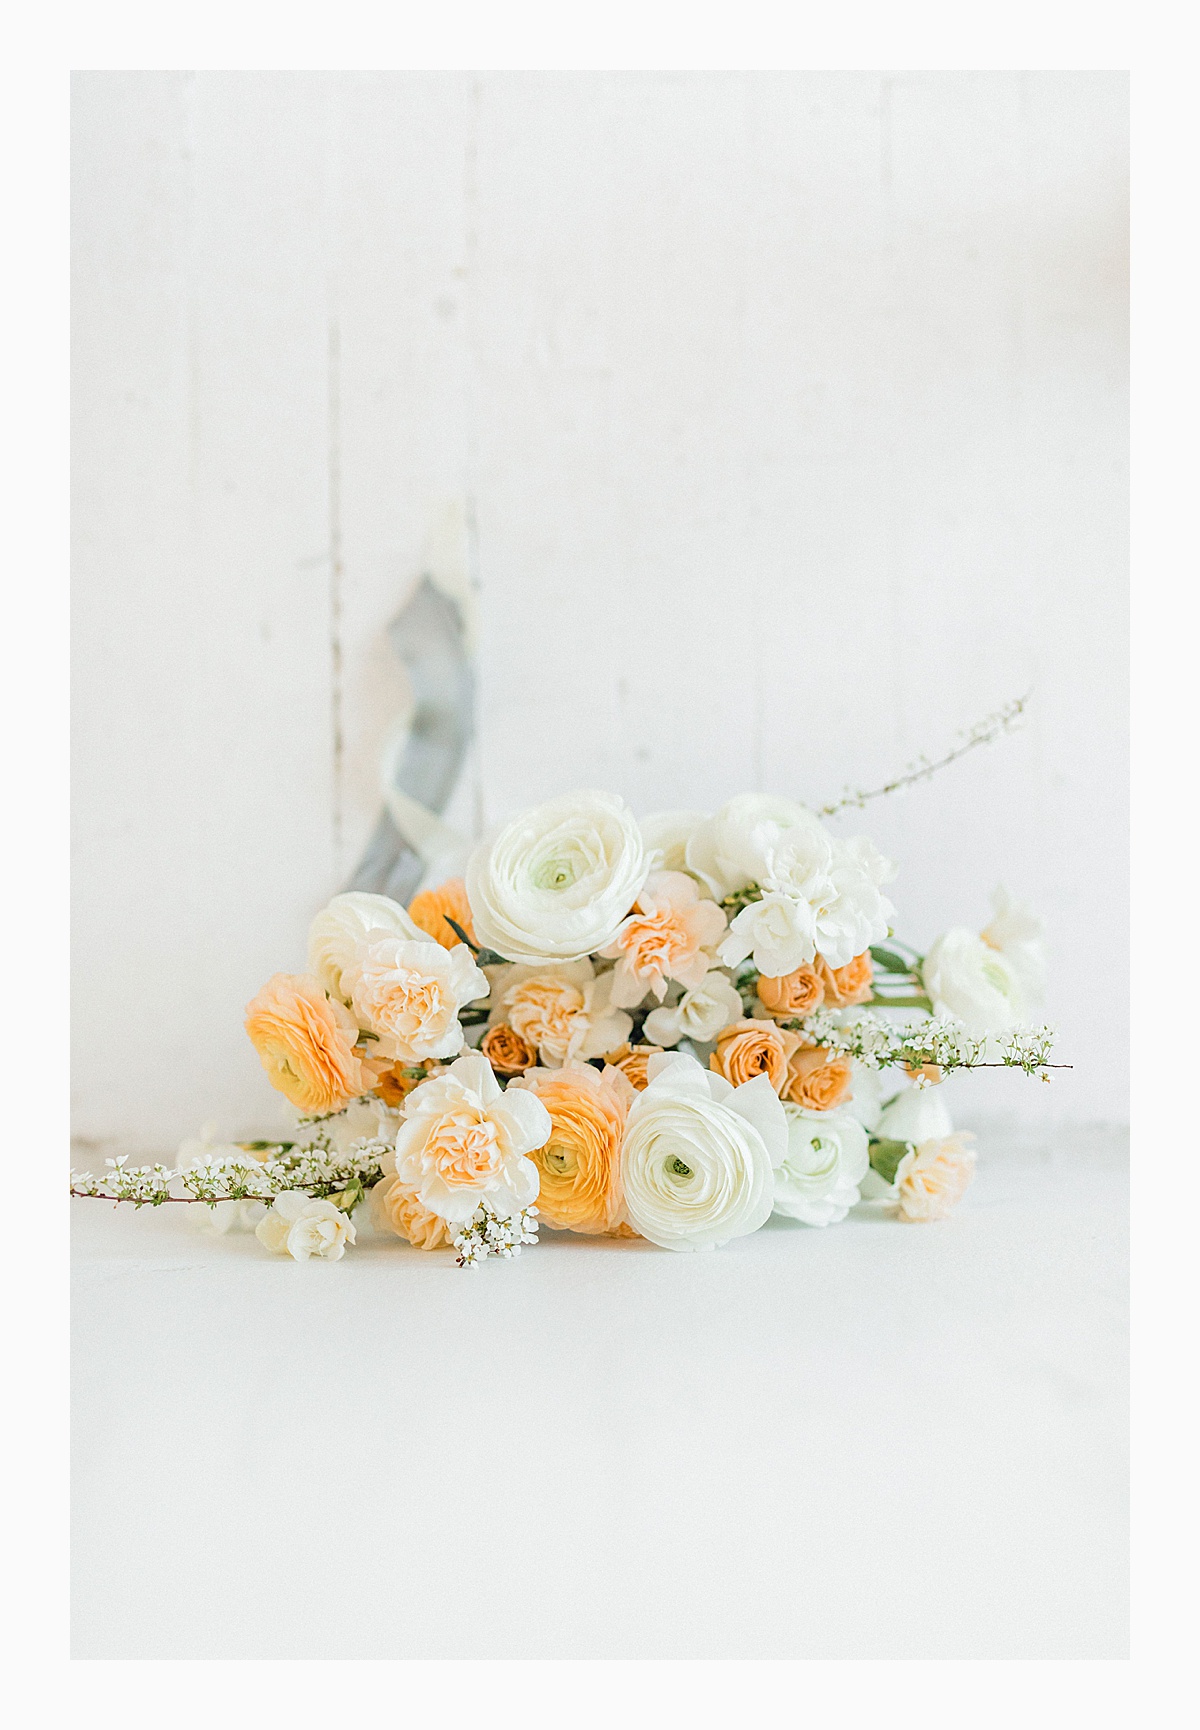 The Bemis Building in downtown Seattle is one of my favorite places to use for photo shoots!  This styled bridal shoot with touches of peach and white was dreamy.  #emmarosecompany #kindredpresets #seattlebride_0008.jpg